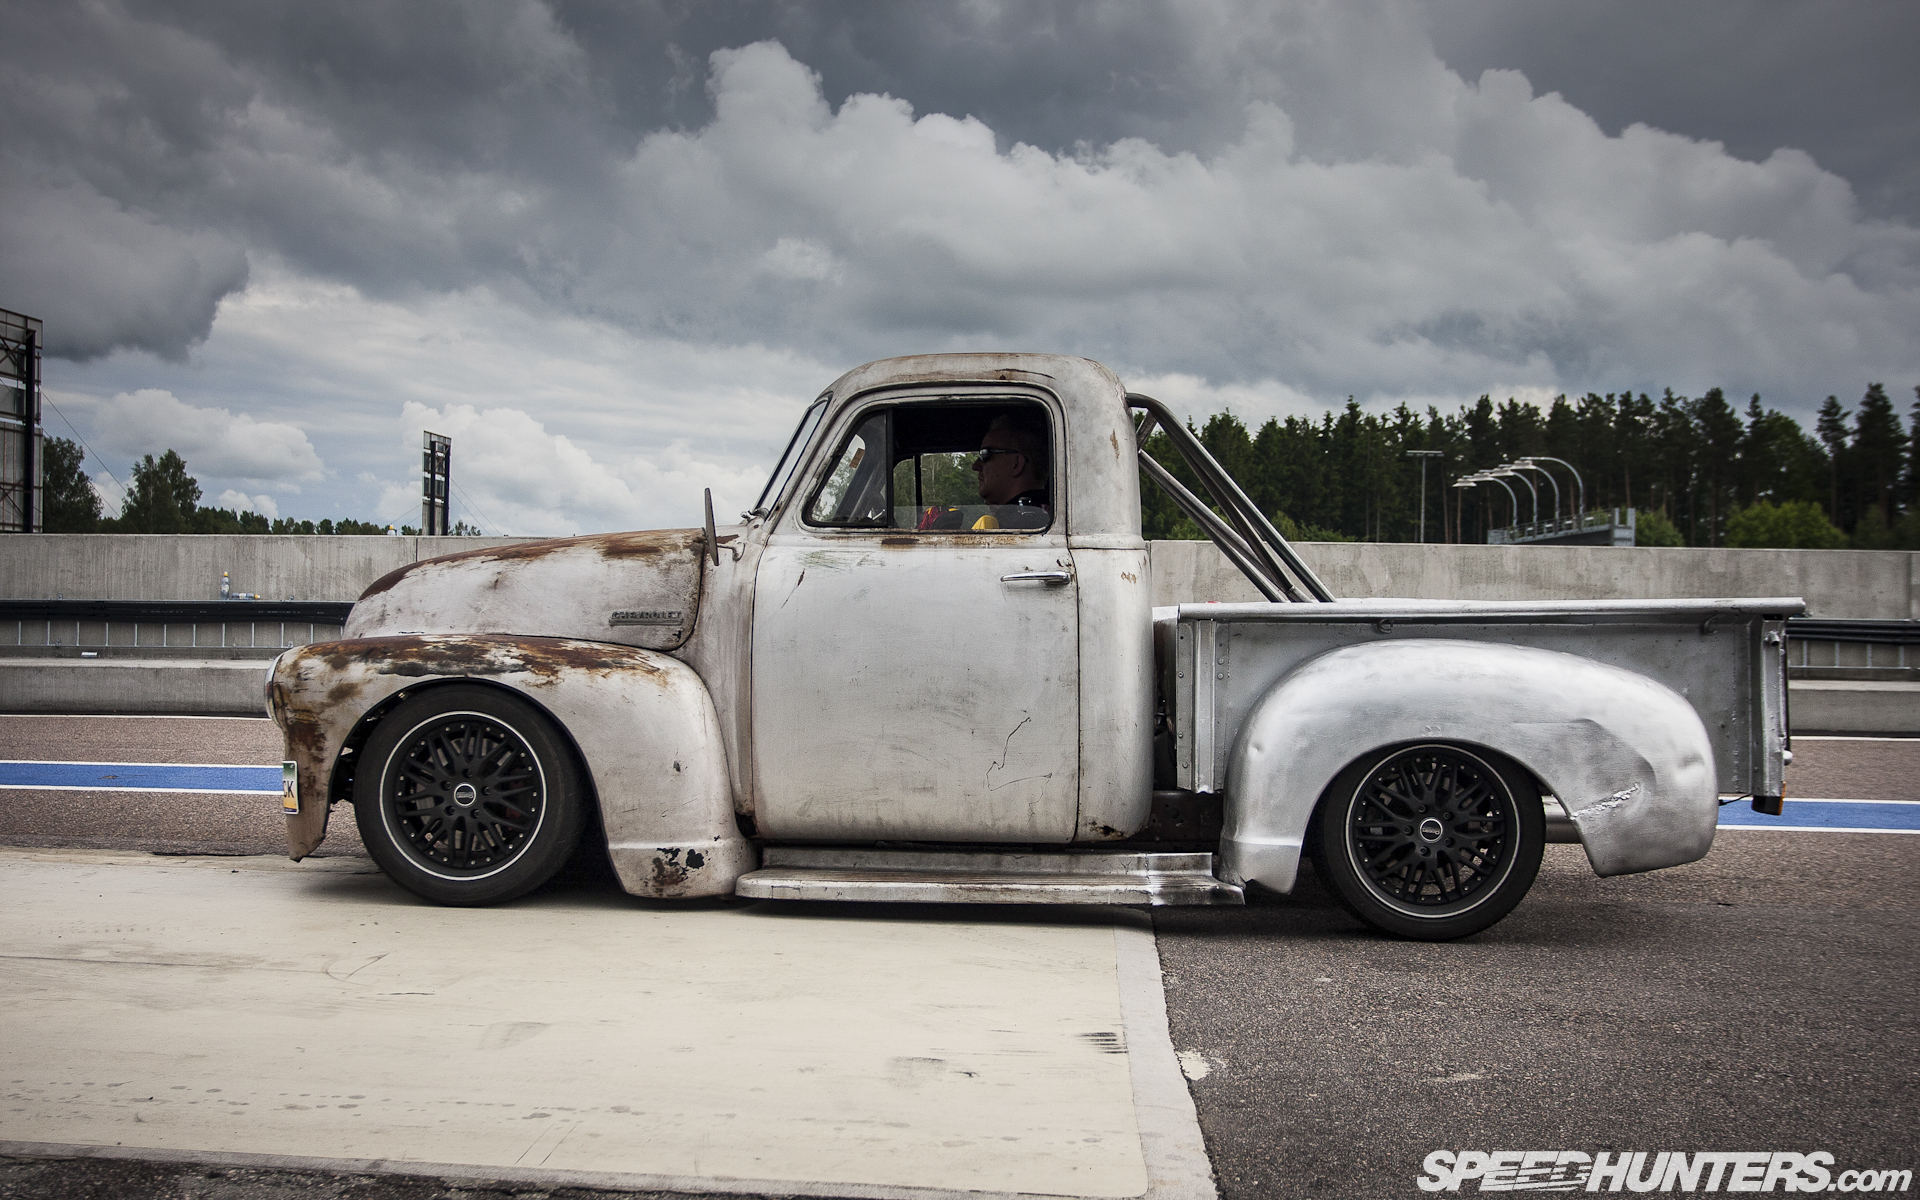 Chevy Pick-Up 1920 × 1200 Photo by Paddy McGrath.